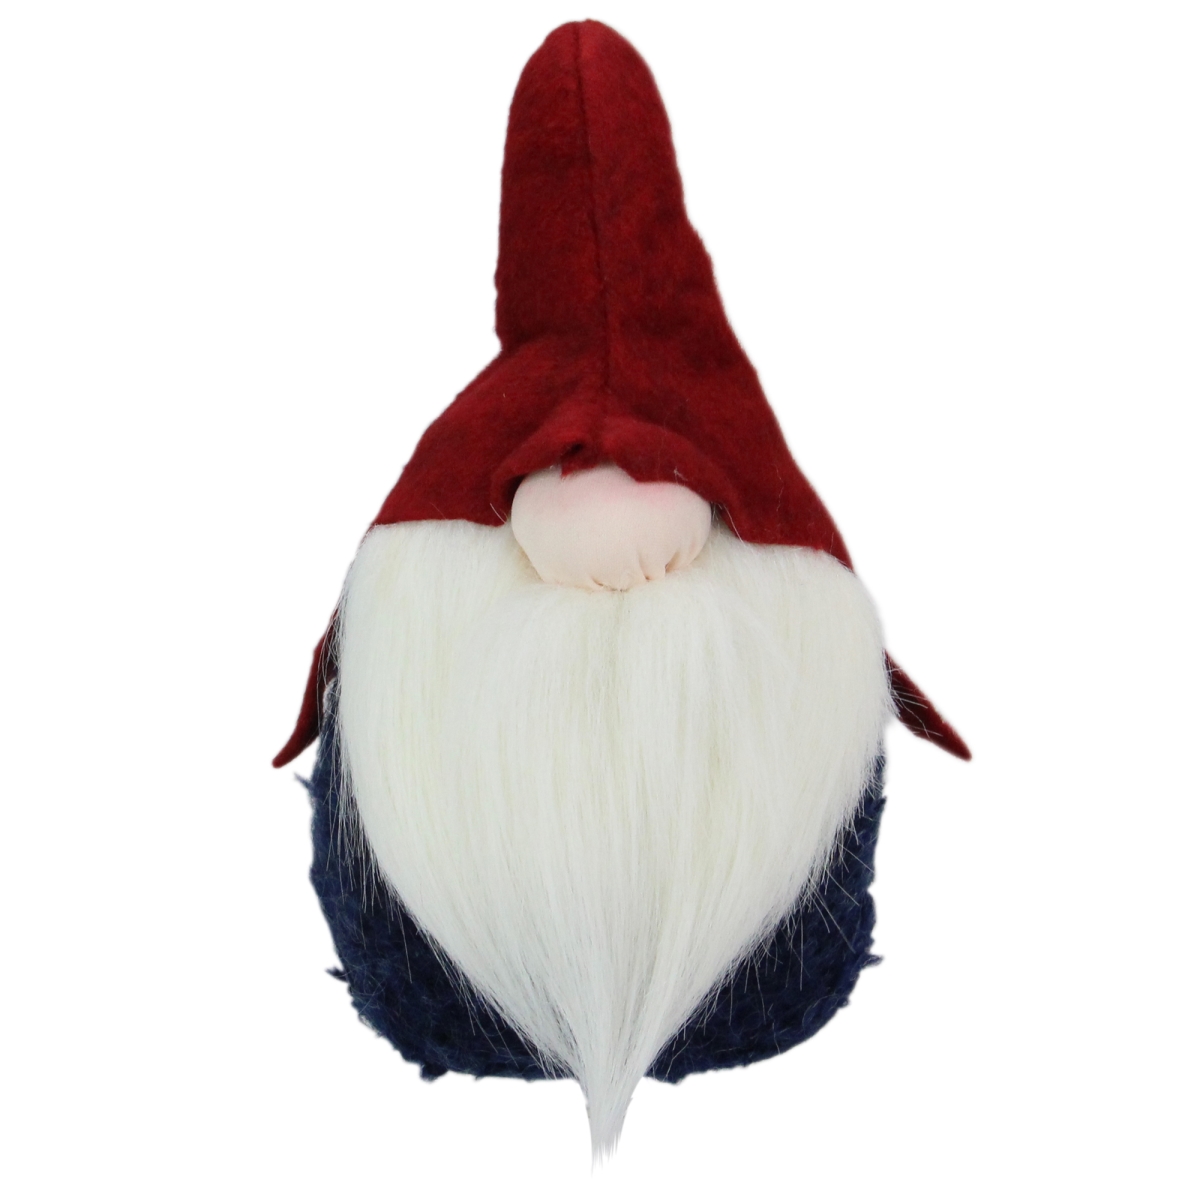 Picture of Northlight 33670805 10 in. Plush Big Nose Gnome in Red Felt Hat & Furry Blue Bottom